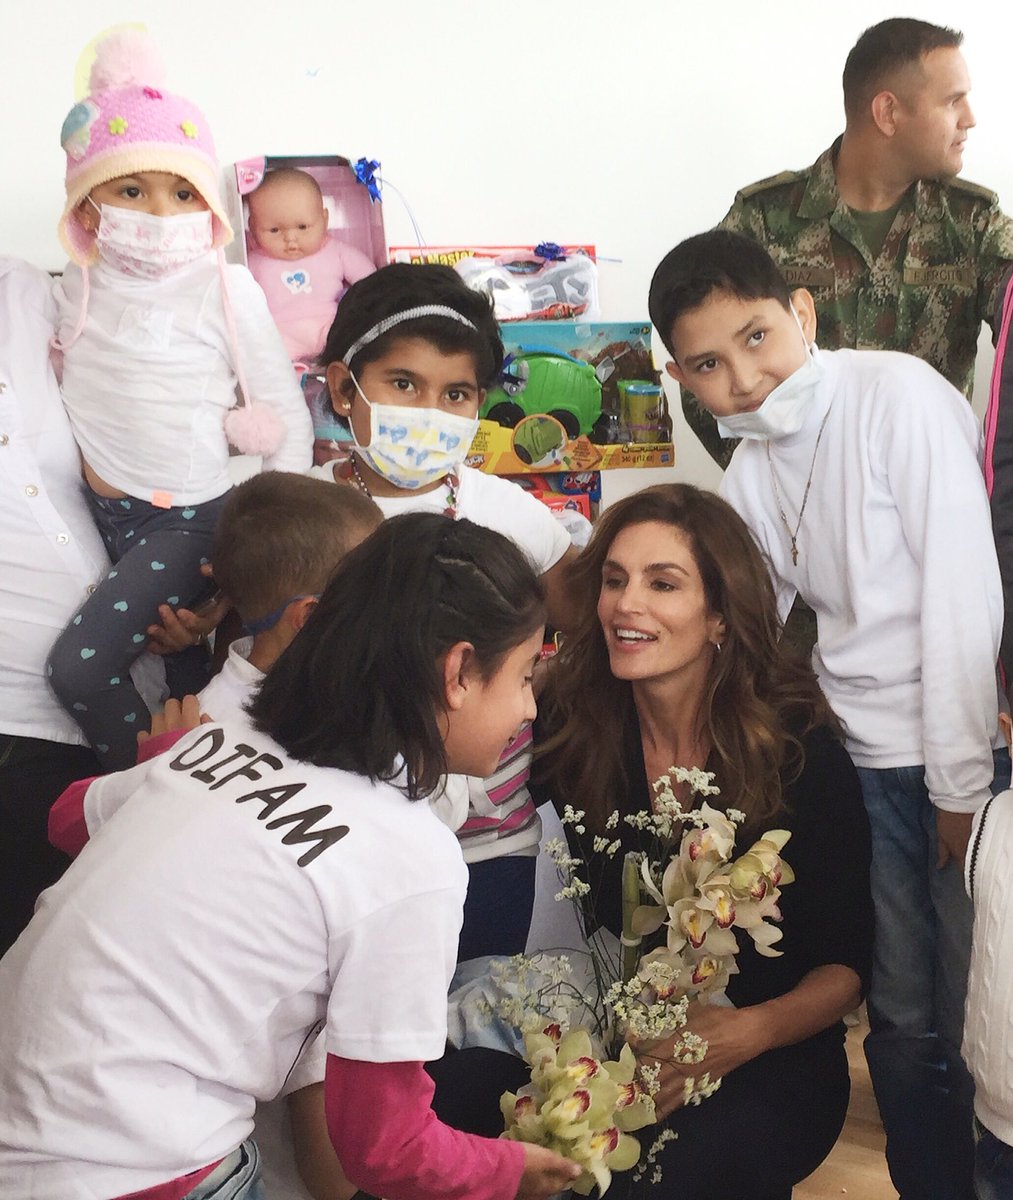 RT @MeaningfulBty: .@cindycrawford spending the day at the Central Military Children's Hospital in Bogotá. ❤️ https://t.co/Qn8gXkkDg1 https…